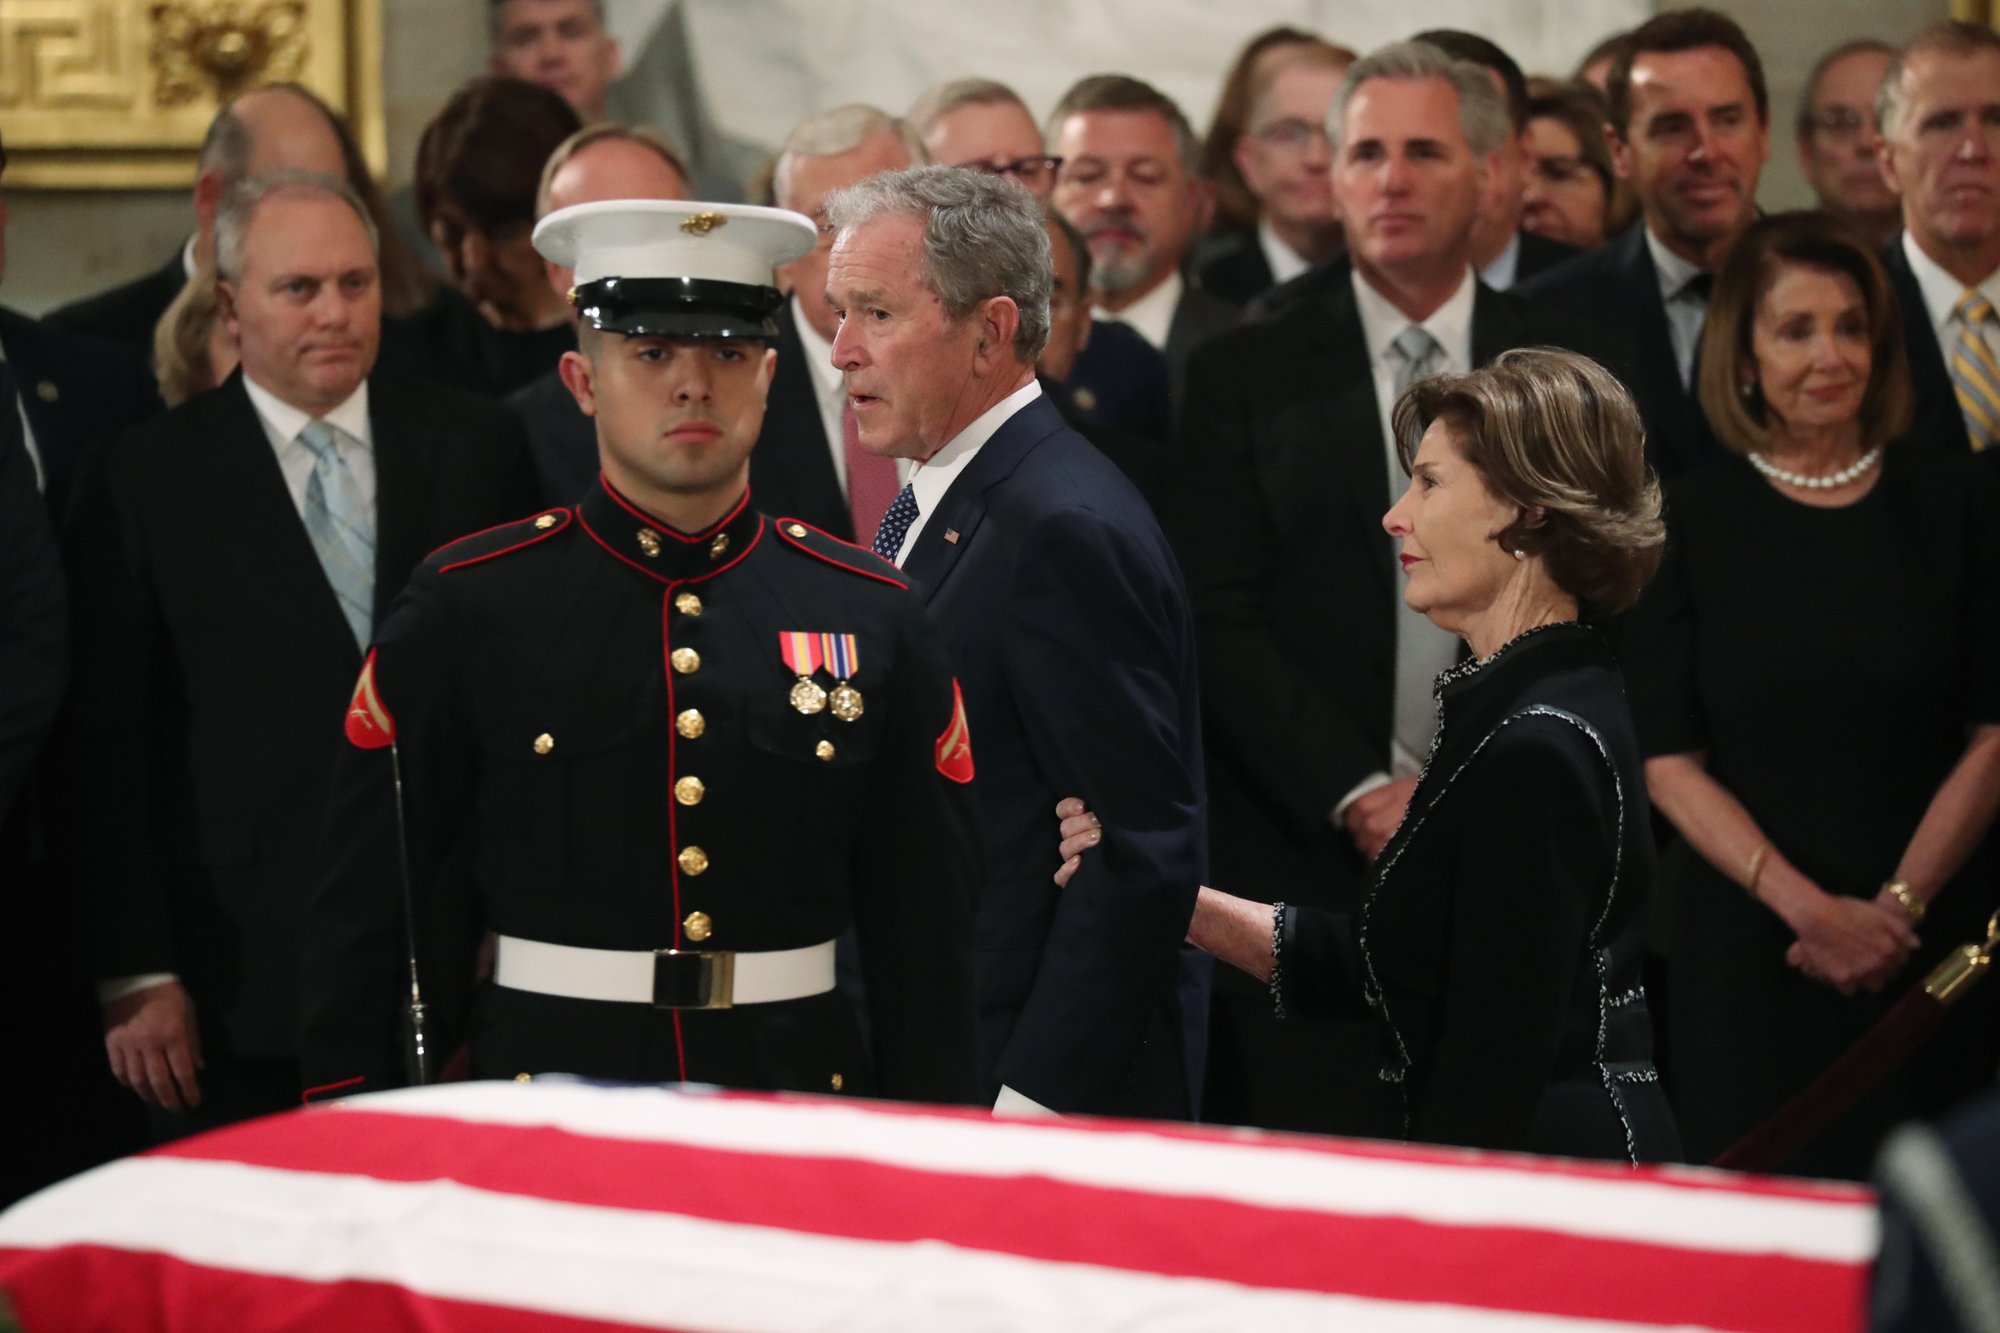 Former President George W. Bush, with his wife former first lady Laura, walks past the casket of his father, former President George H.W. Bush at the Capitol in Washington, on Monday, Dec. 3, 2018. Photo: AP